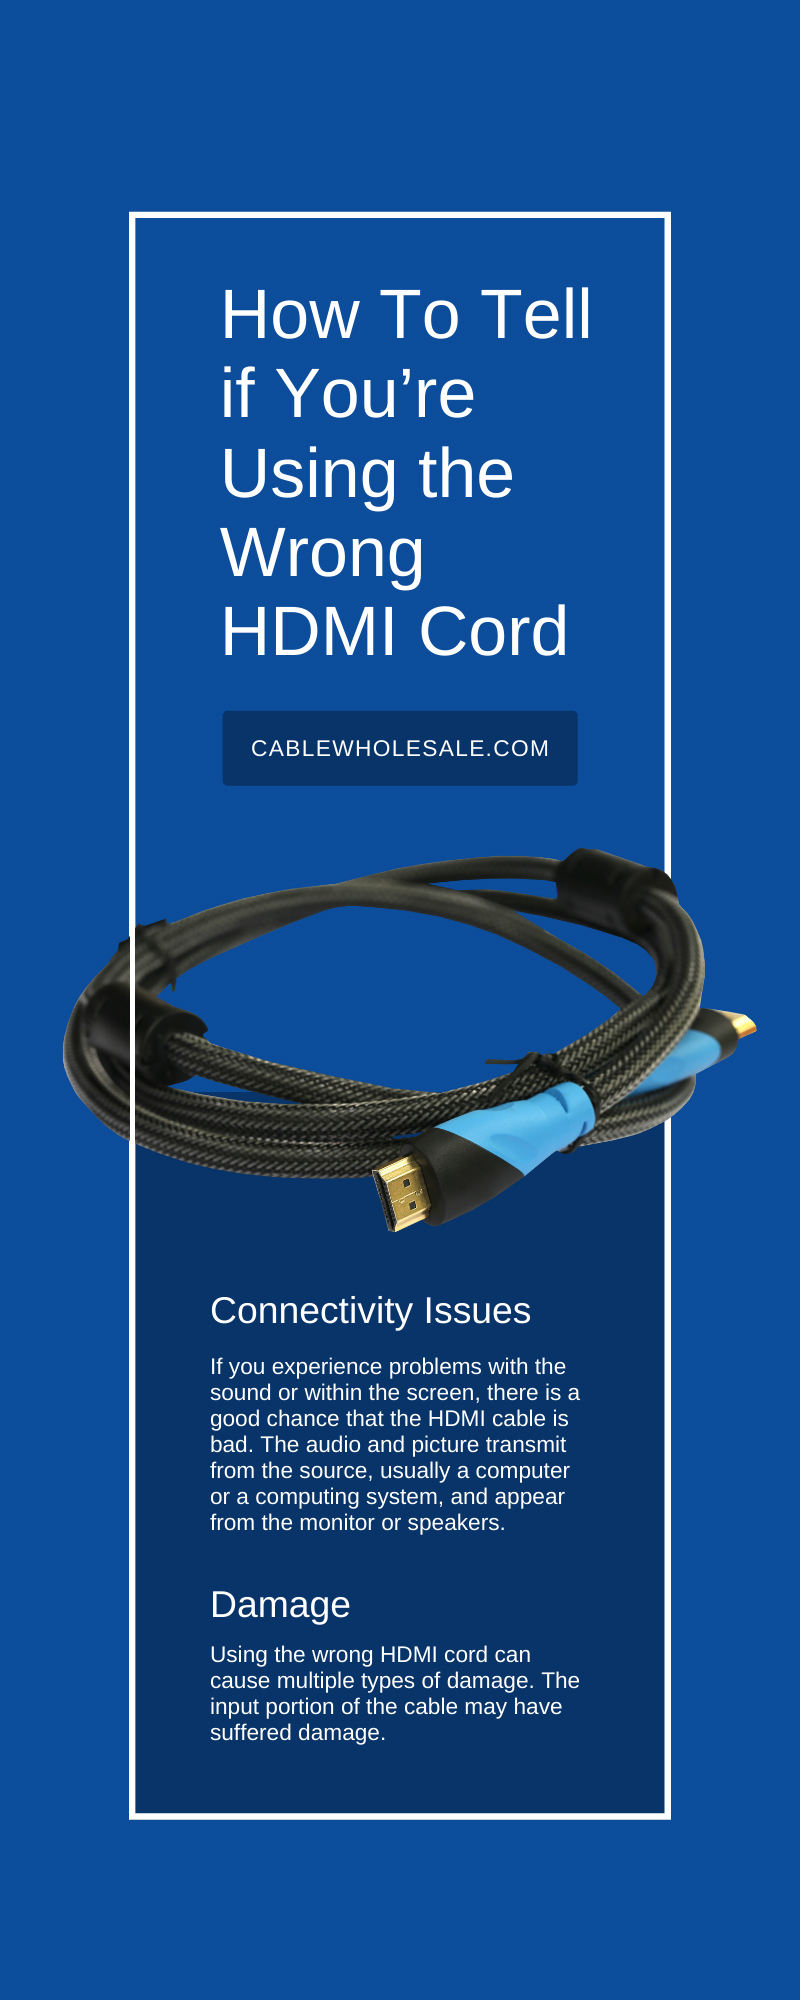 How To Tell if You’re Using the Wrong HDMI Cord